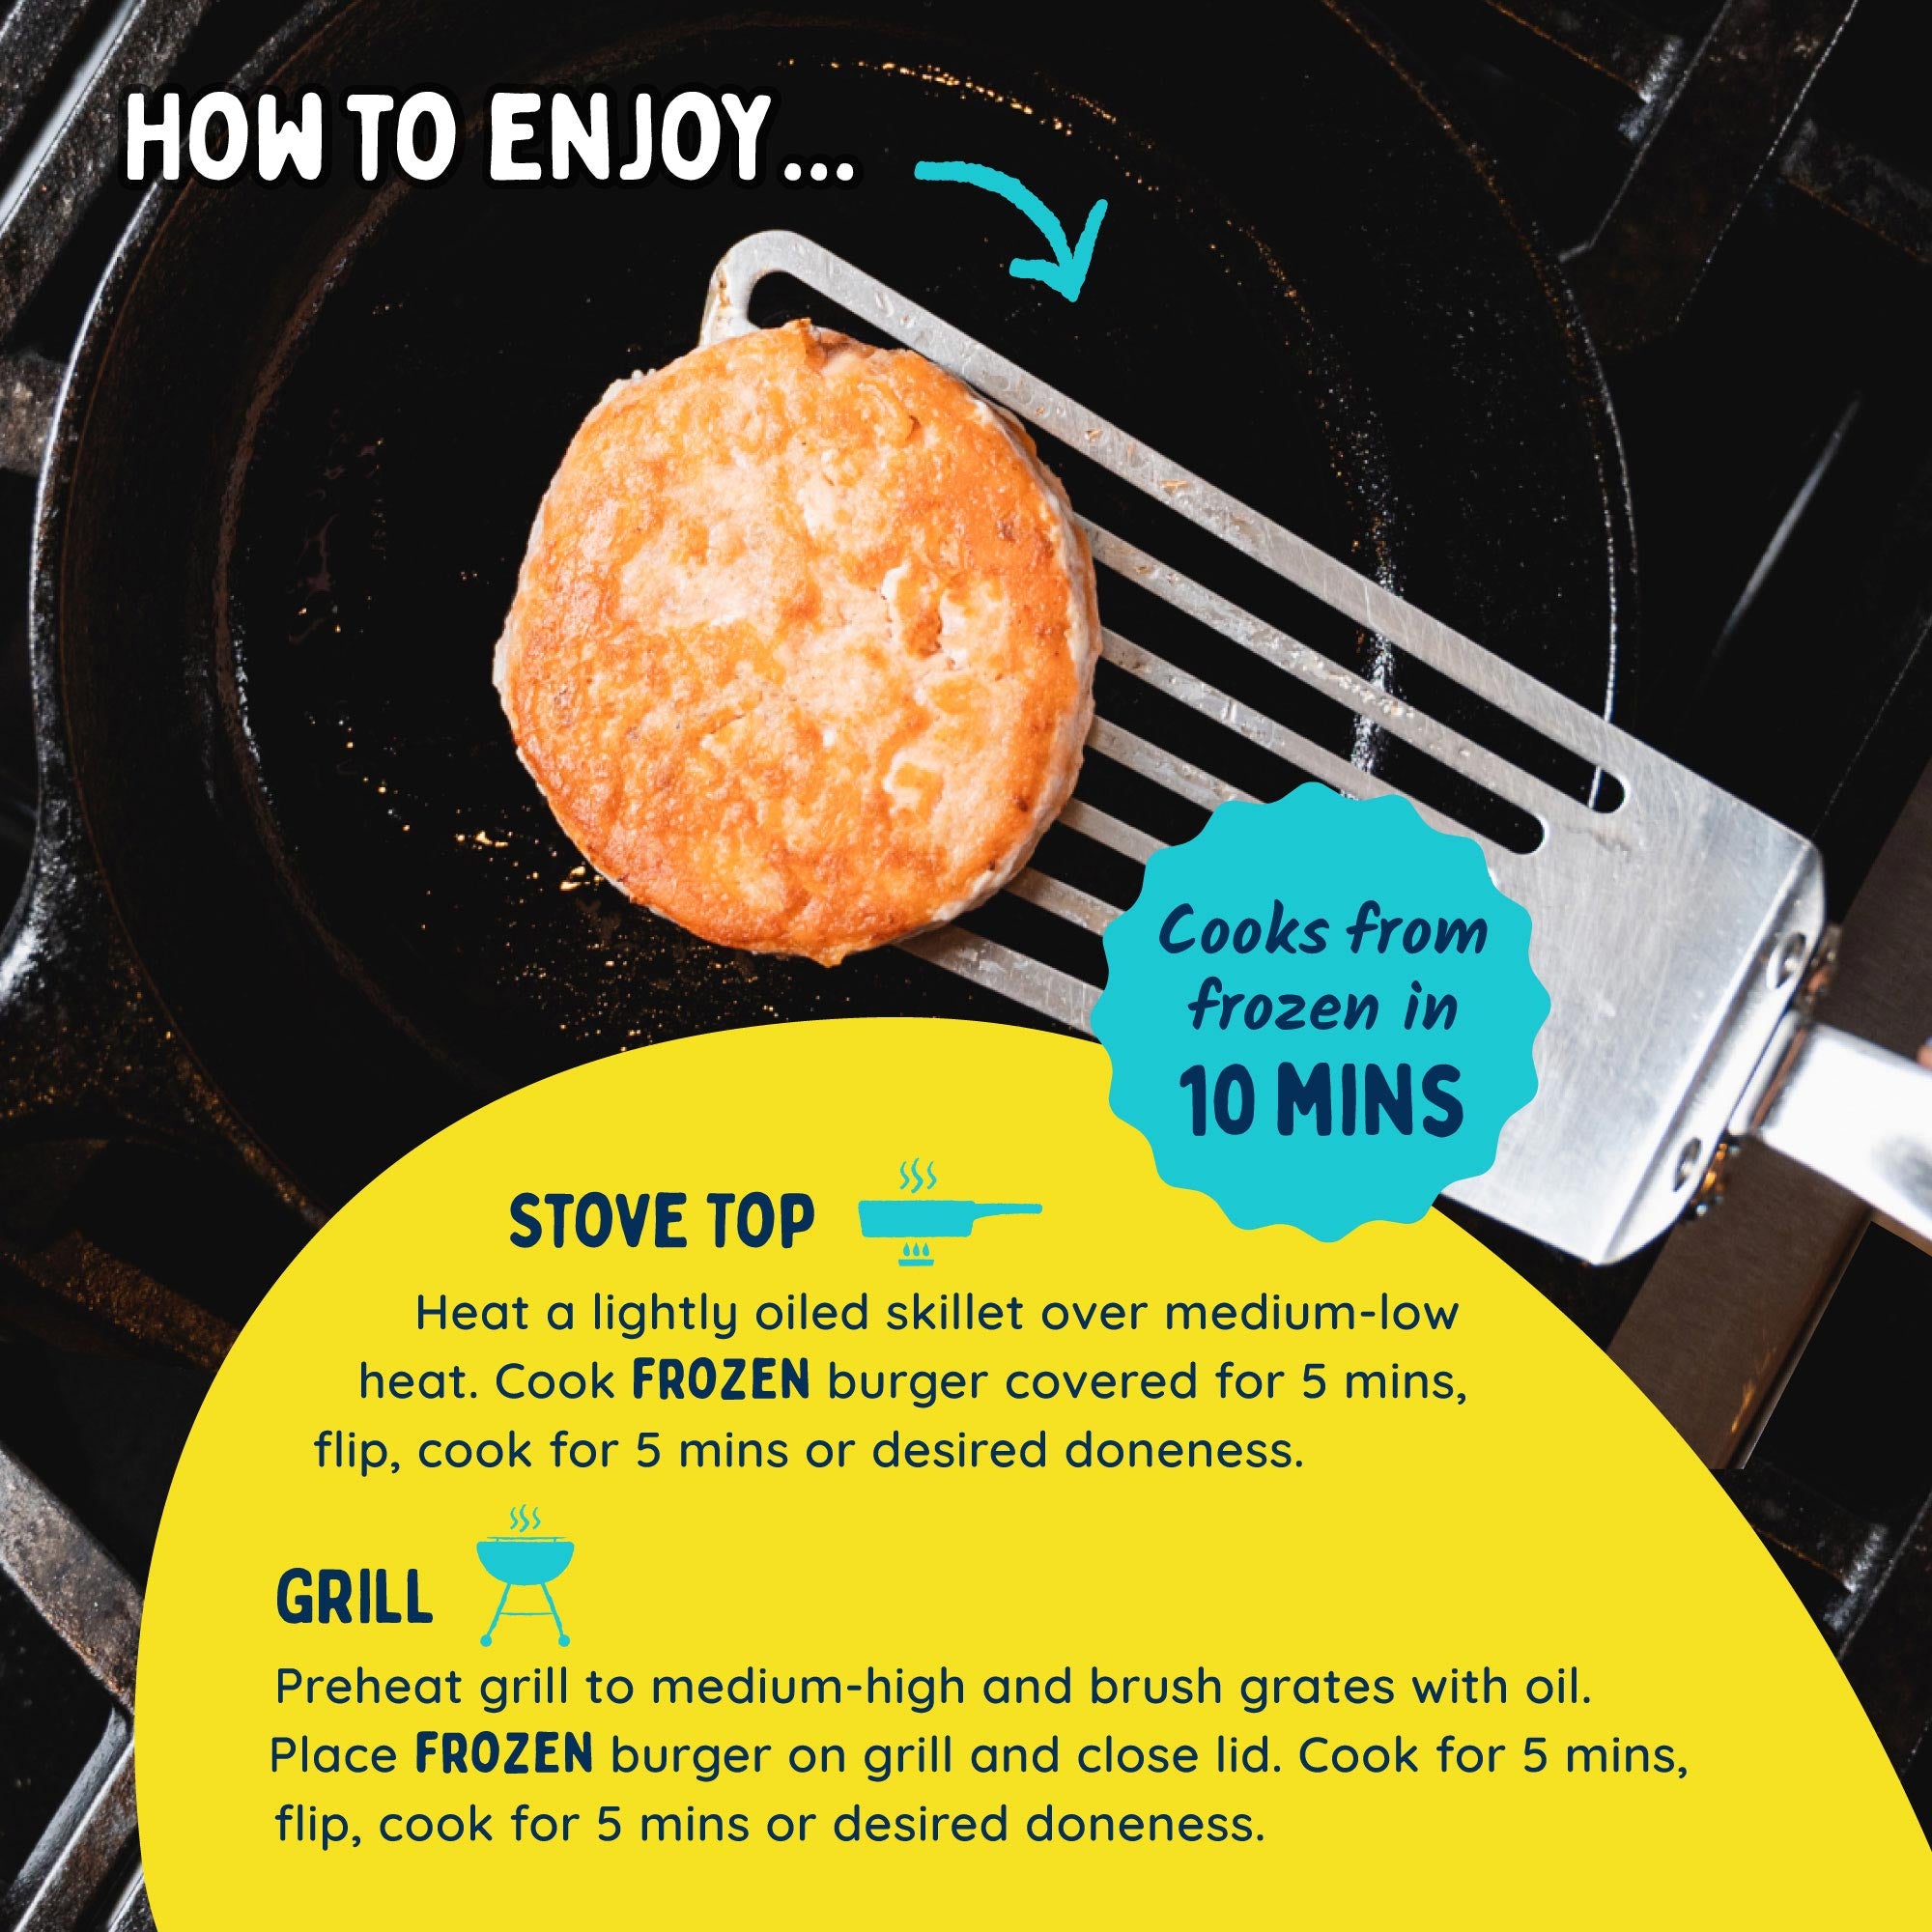 How To Enjoy - Stove Top - Heat a lightly oiled skillet over medium-low heat. Cook frozen burger covered for 5 mins, filp, cook for 5 mins or desired doneness. - GRILL - Preheat grill to medium-high and brush grates with oil. Place frozen burger on grill and close lid. Cook for 5 mins, flip, cook for 5 mins or desired doneness. - Cooks from frozen in 10 MINS.